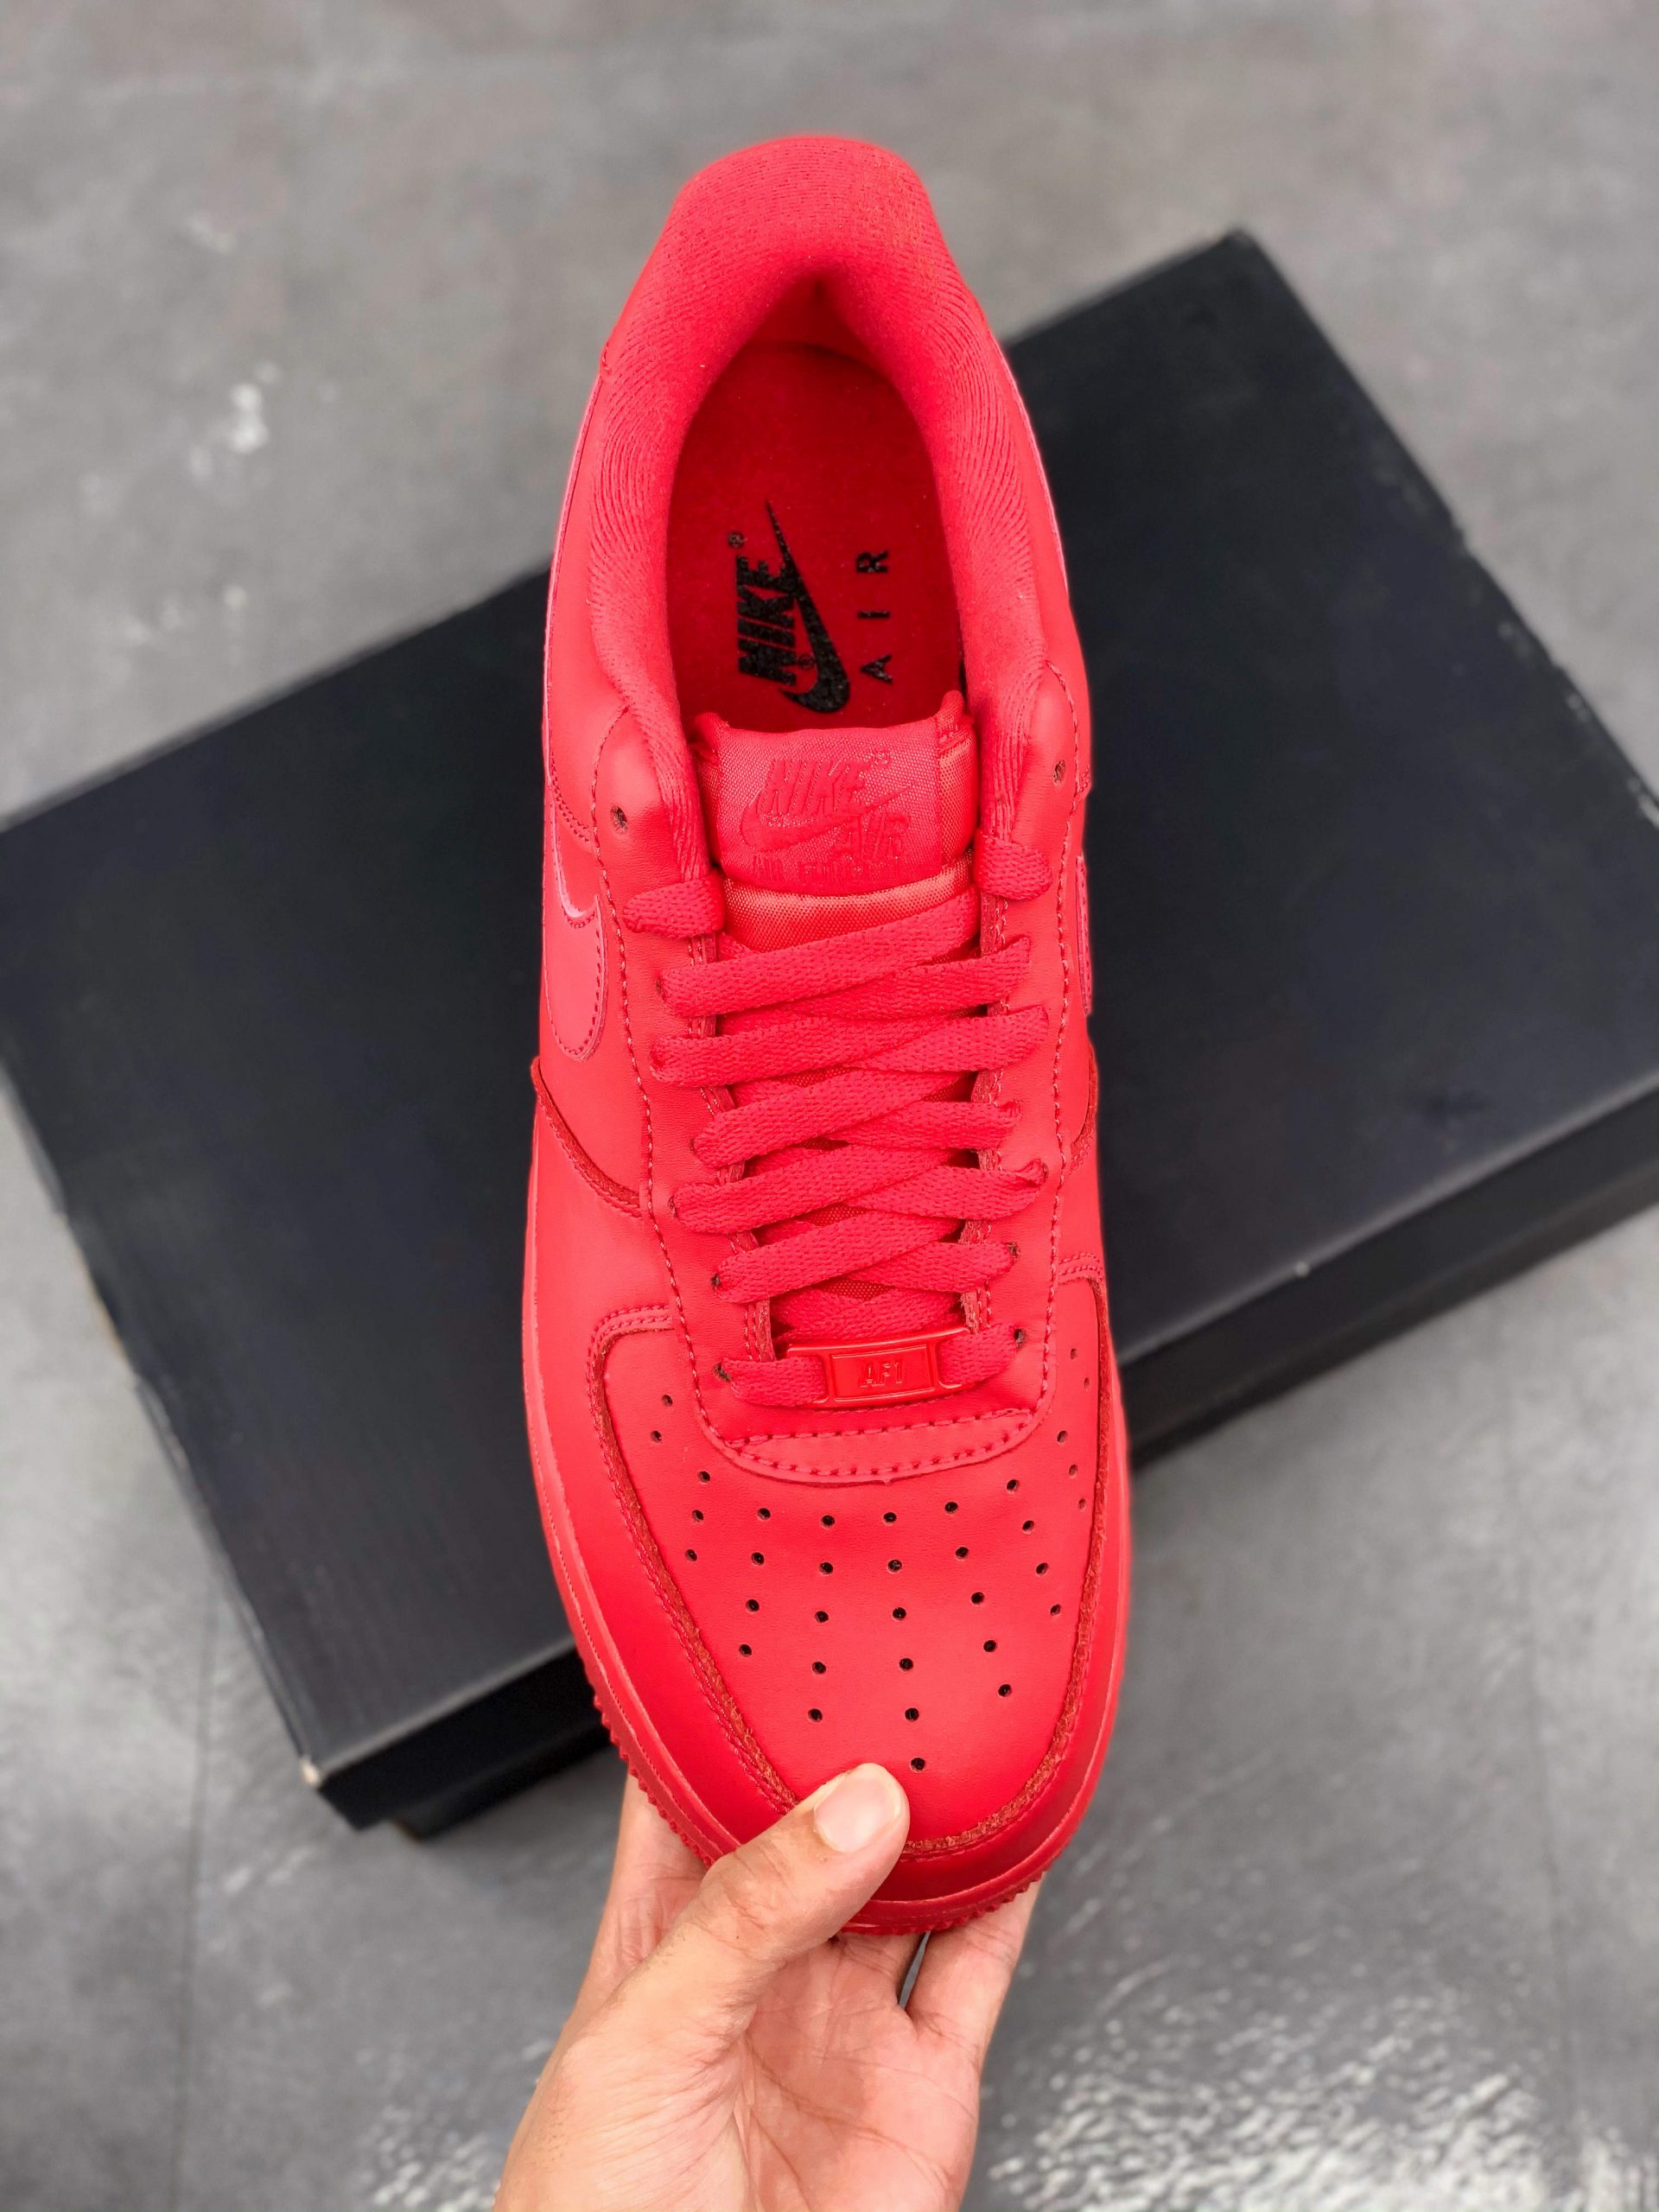 Nike Air Force 1 University Red/Black CW6999-600 For Sale – Sneaker Hello